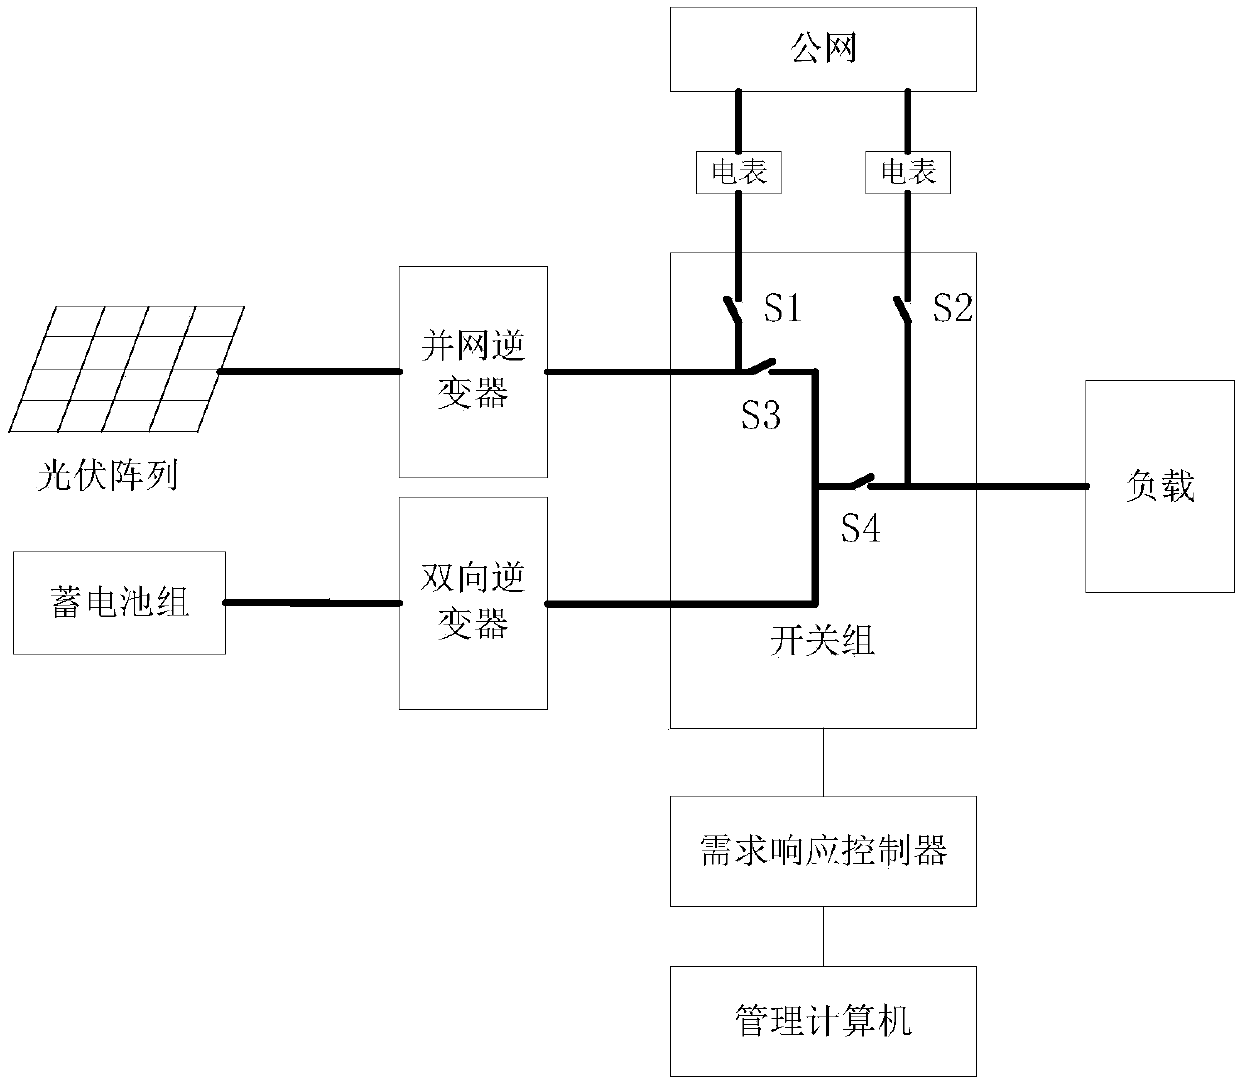 Off-grid grid-connected hybrid photovoltaic power generation control system and economical operation optimization method thereof